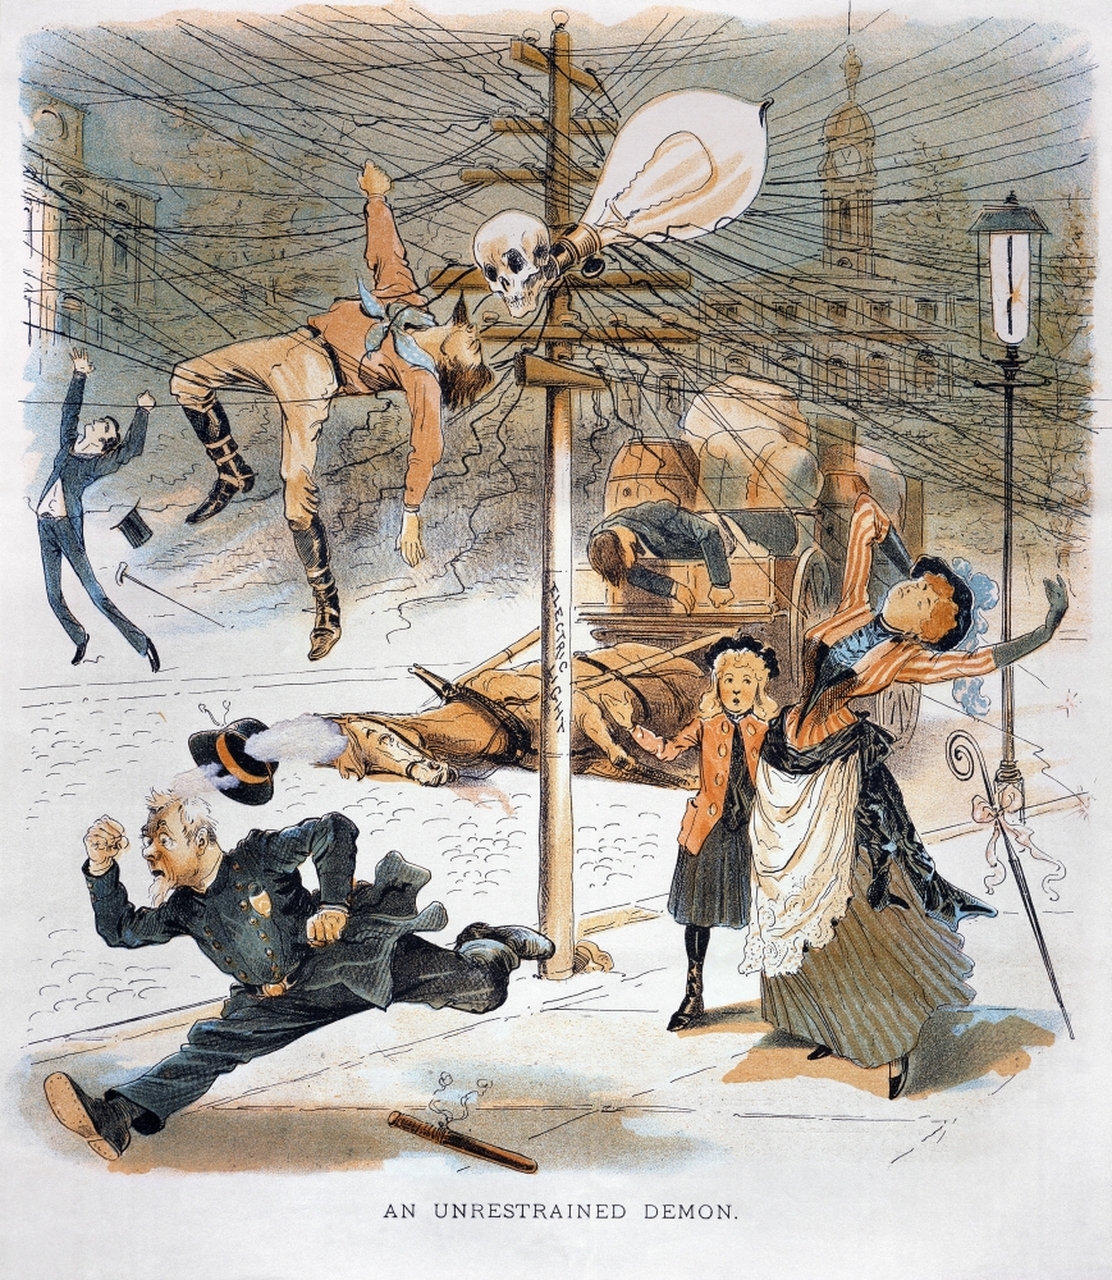 Wired Fears: Electricity and Technophobia in the Nineteenth Century